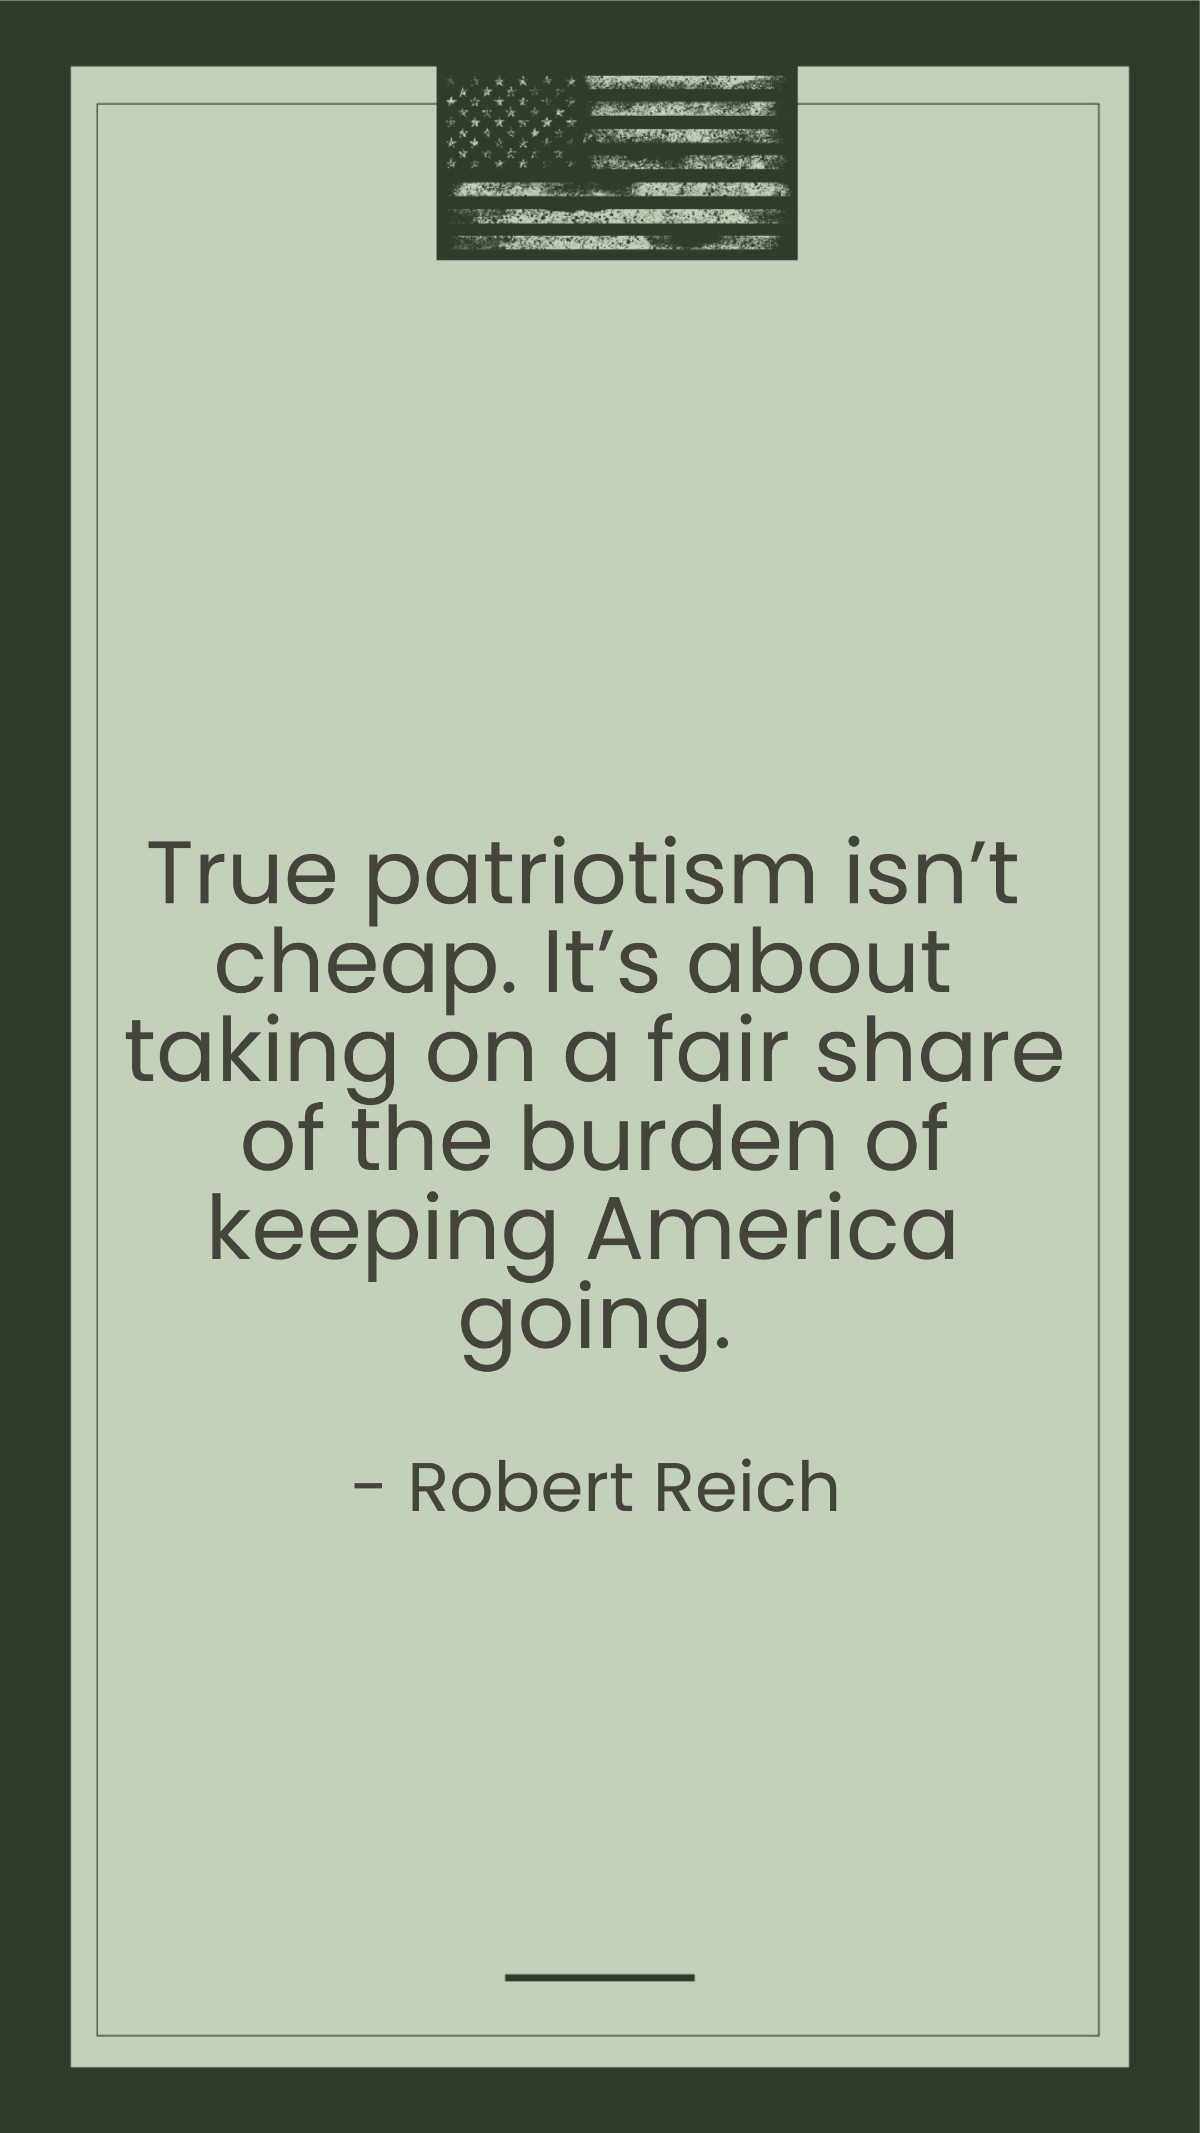 Free  Robert Reich - True patriotism isn't cheap. It's about taking on a fair share of the burden of keeping America going. Template